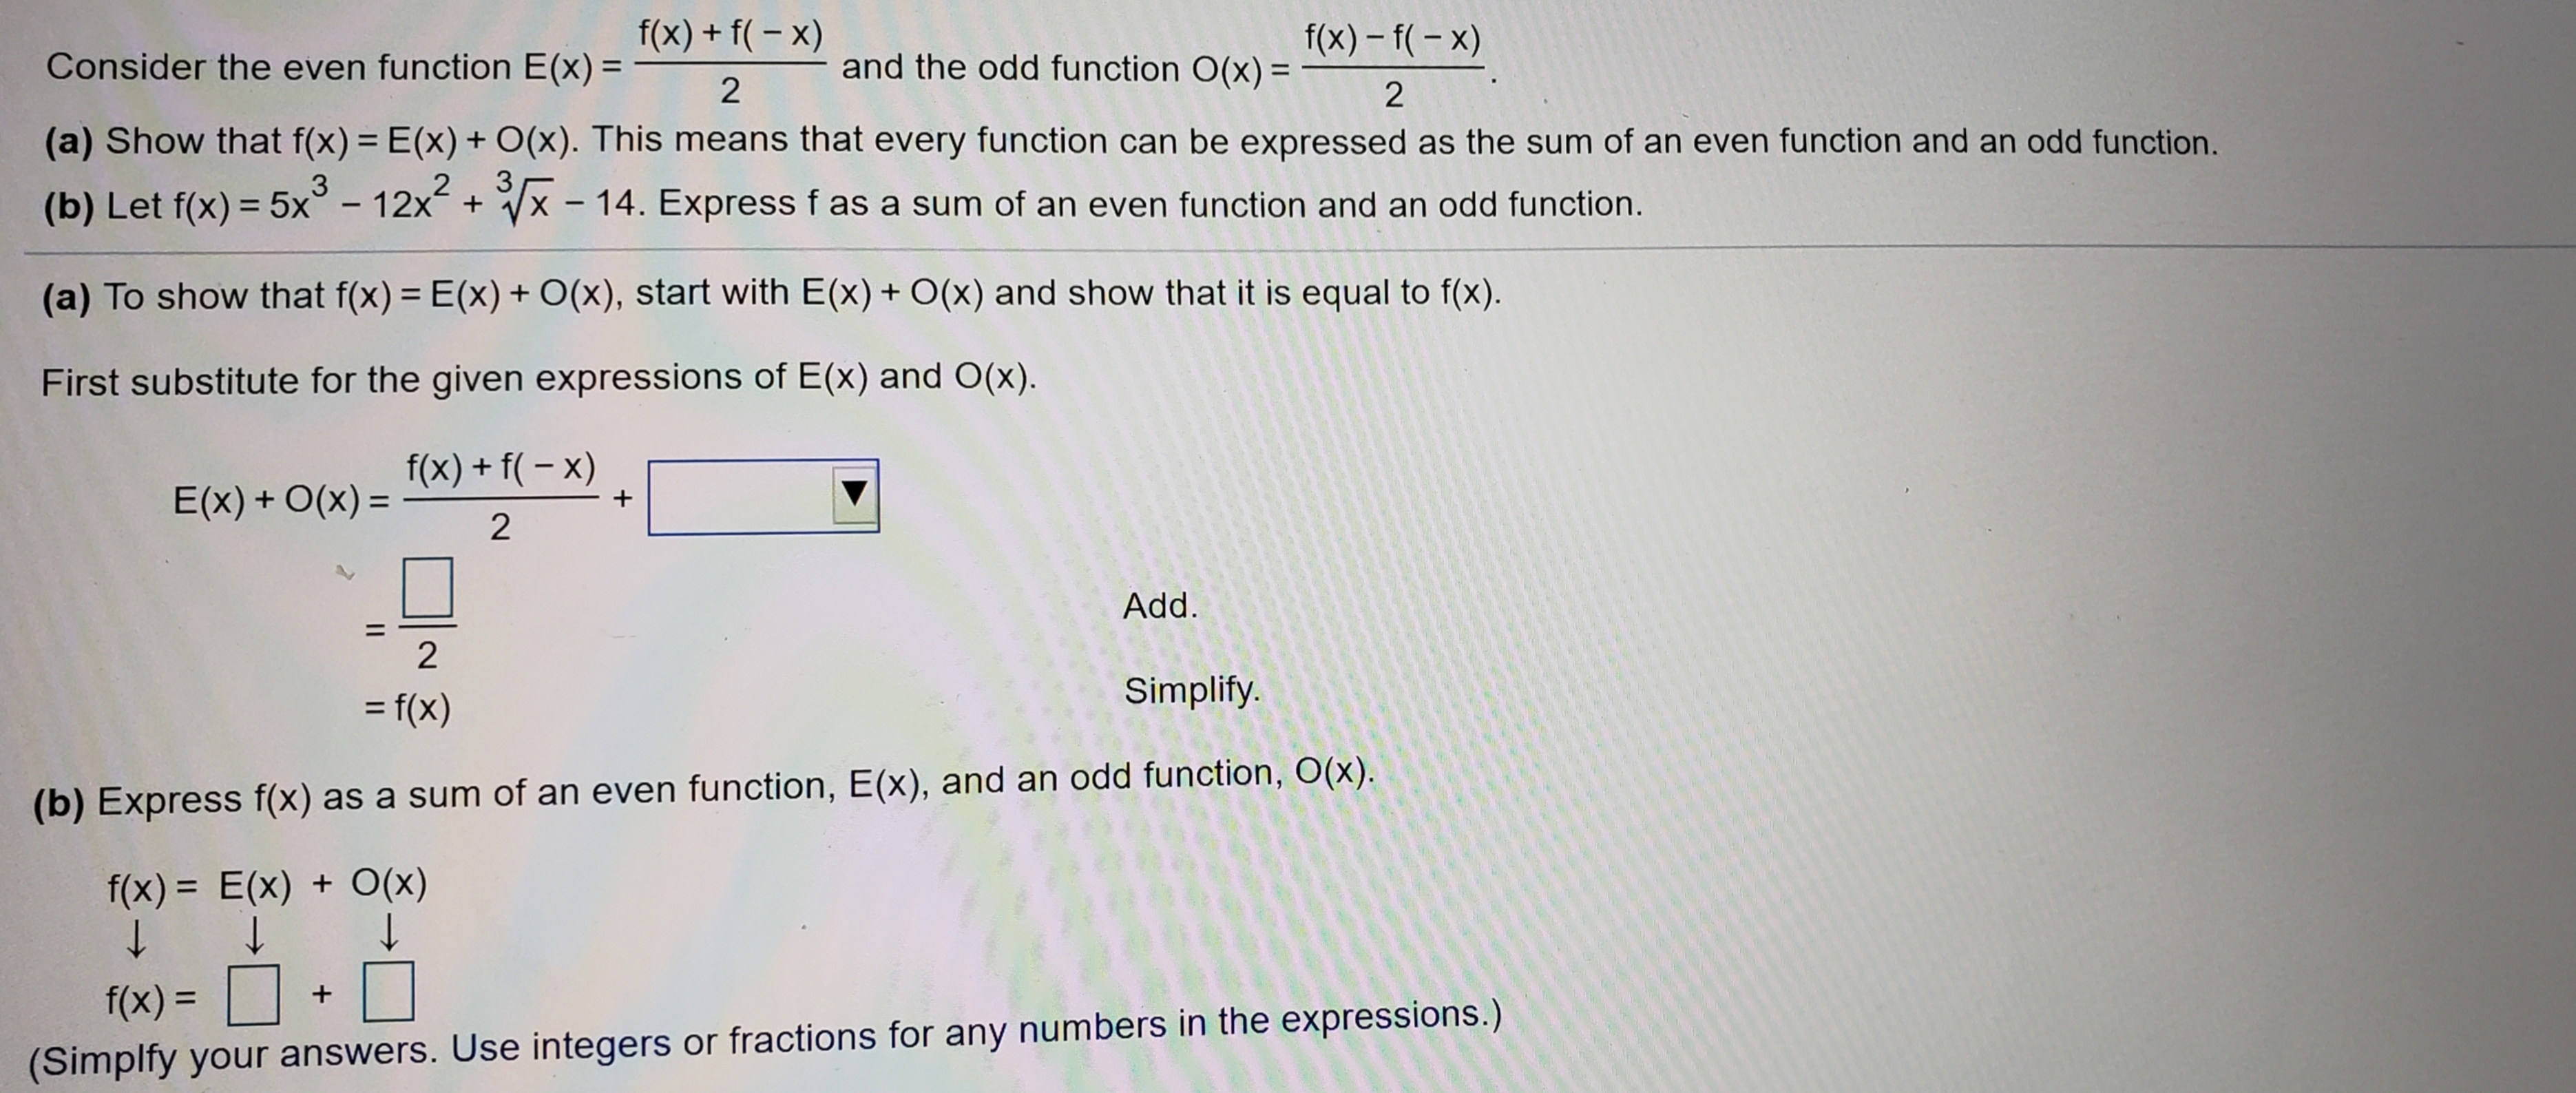 f(x) + f(- x)
f(x) – f(- x)
and the odd function O(x) =
Consider the even function E(x) =
%3D
(a) Show that f(x) = E(x) + O(x). This means that every function can be expressed as the sum of an even function and an odd function.
%3D
3
3.
(x- 14. Express f as a sum of an even function and an odd function.
(b) Let f(x) = 5x° - 12
x +
%3D
(a) To show that f(x) = E(x) + O(x), start with E(x) + O(x) and show that it is equal to f(x).
%3D
First substitute for the given expressions of E(x) and O(x).
f(x) + f( – x)
E(x) + O(x) =
%3D
Add.
Simplify.
= f(x)
%3D
(b) Express f(x) as a sum of an even function, E(x), and an odd function, O(x).
f(x) = E(x) + O(x)
%3D
f(x) =
(Simplfy your answers. Use integers or fractions for any numbers in the expressions.)
2.
